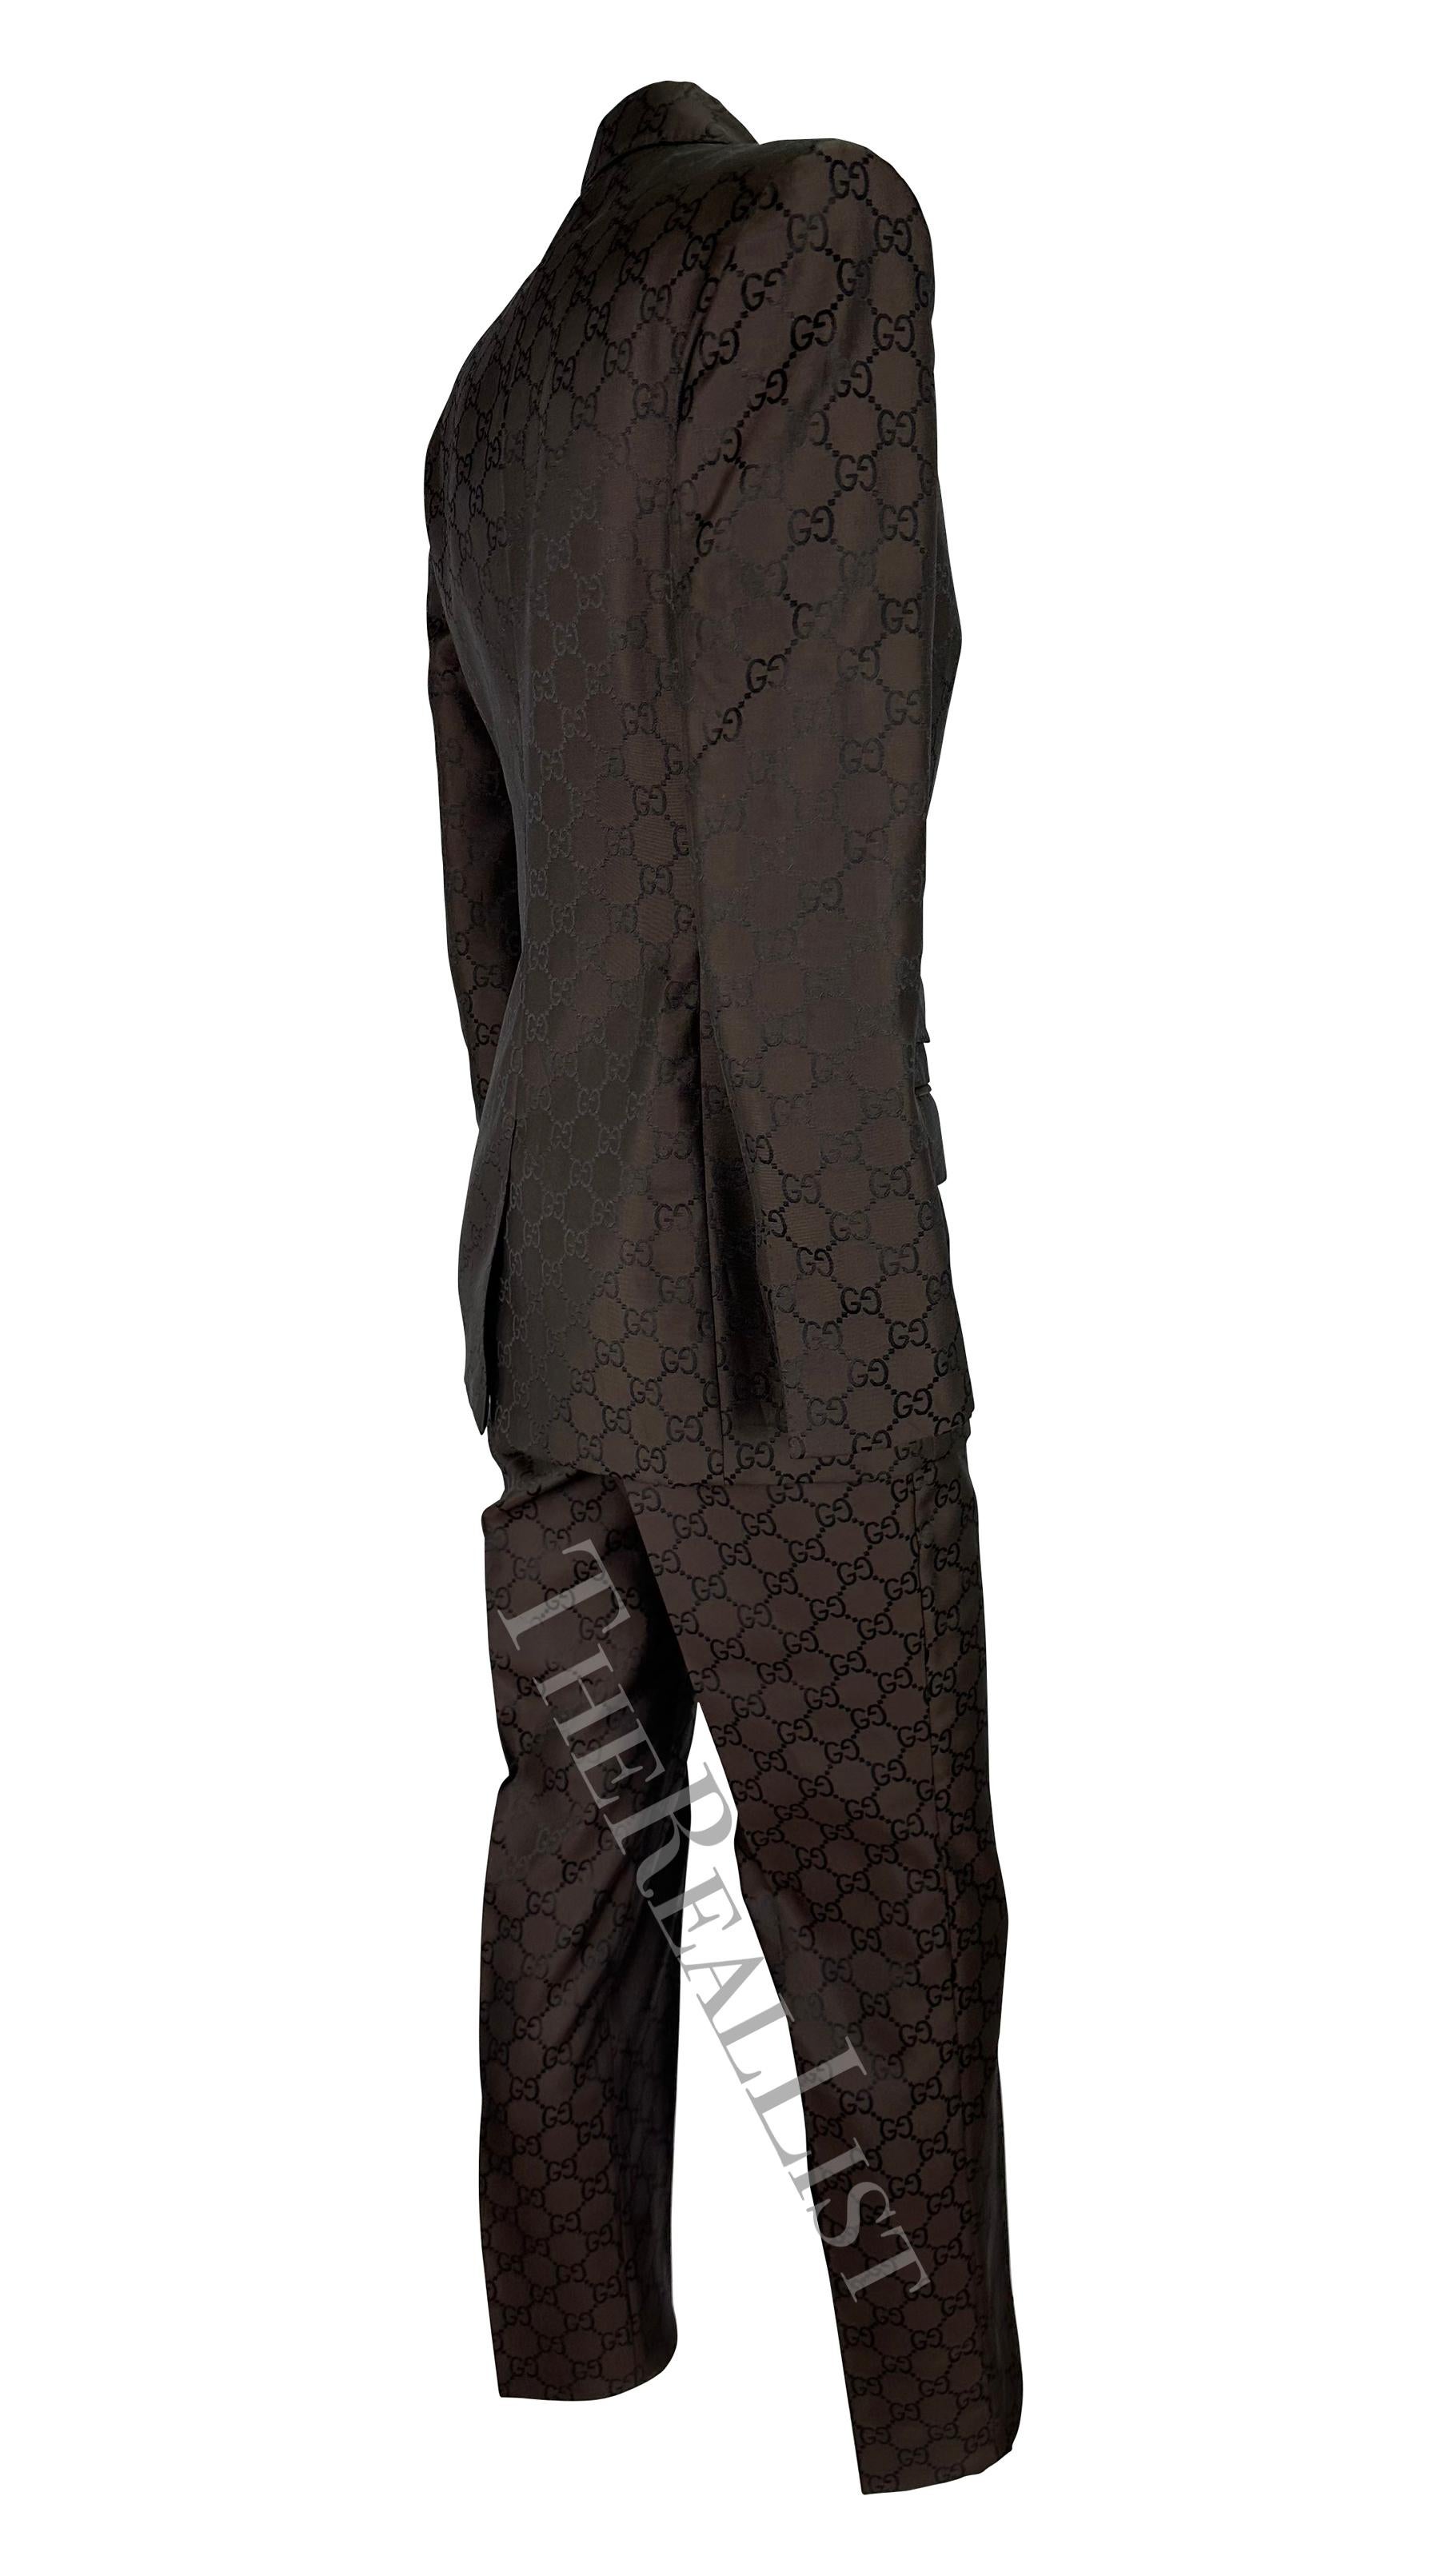 S/S 1998 Gucci by Tom Ford Woven GG Monogram Satin Brown Pantsuit For Sale 2